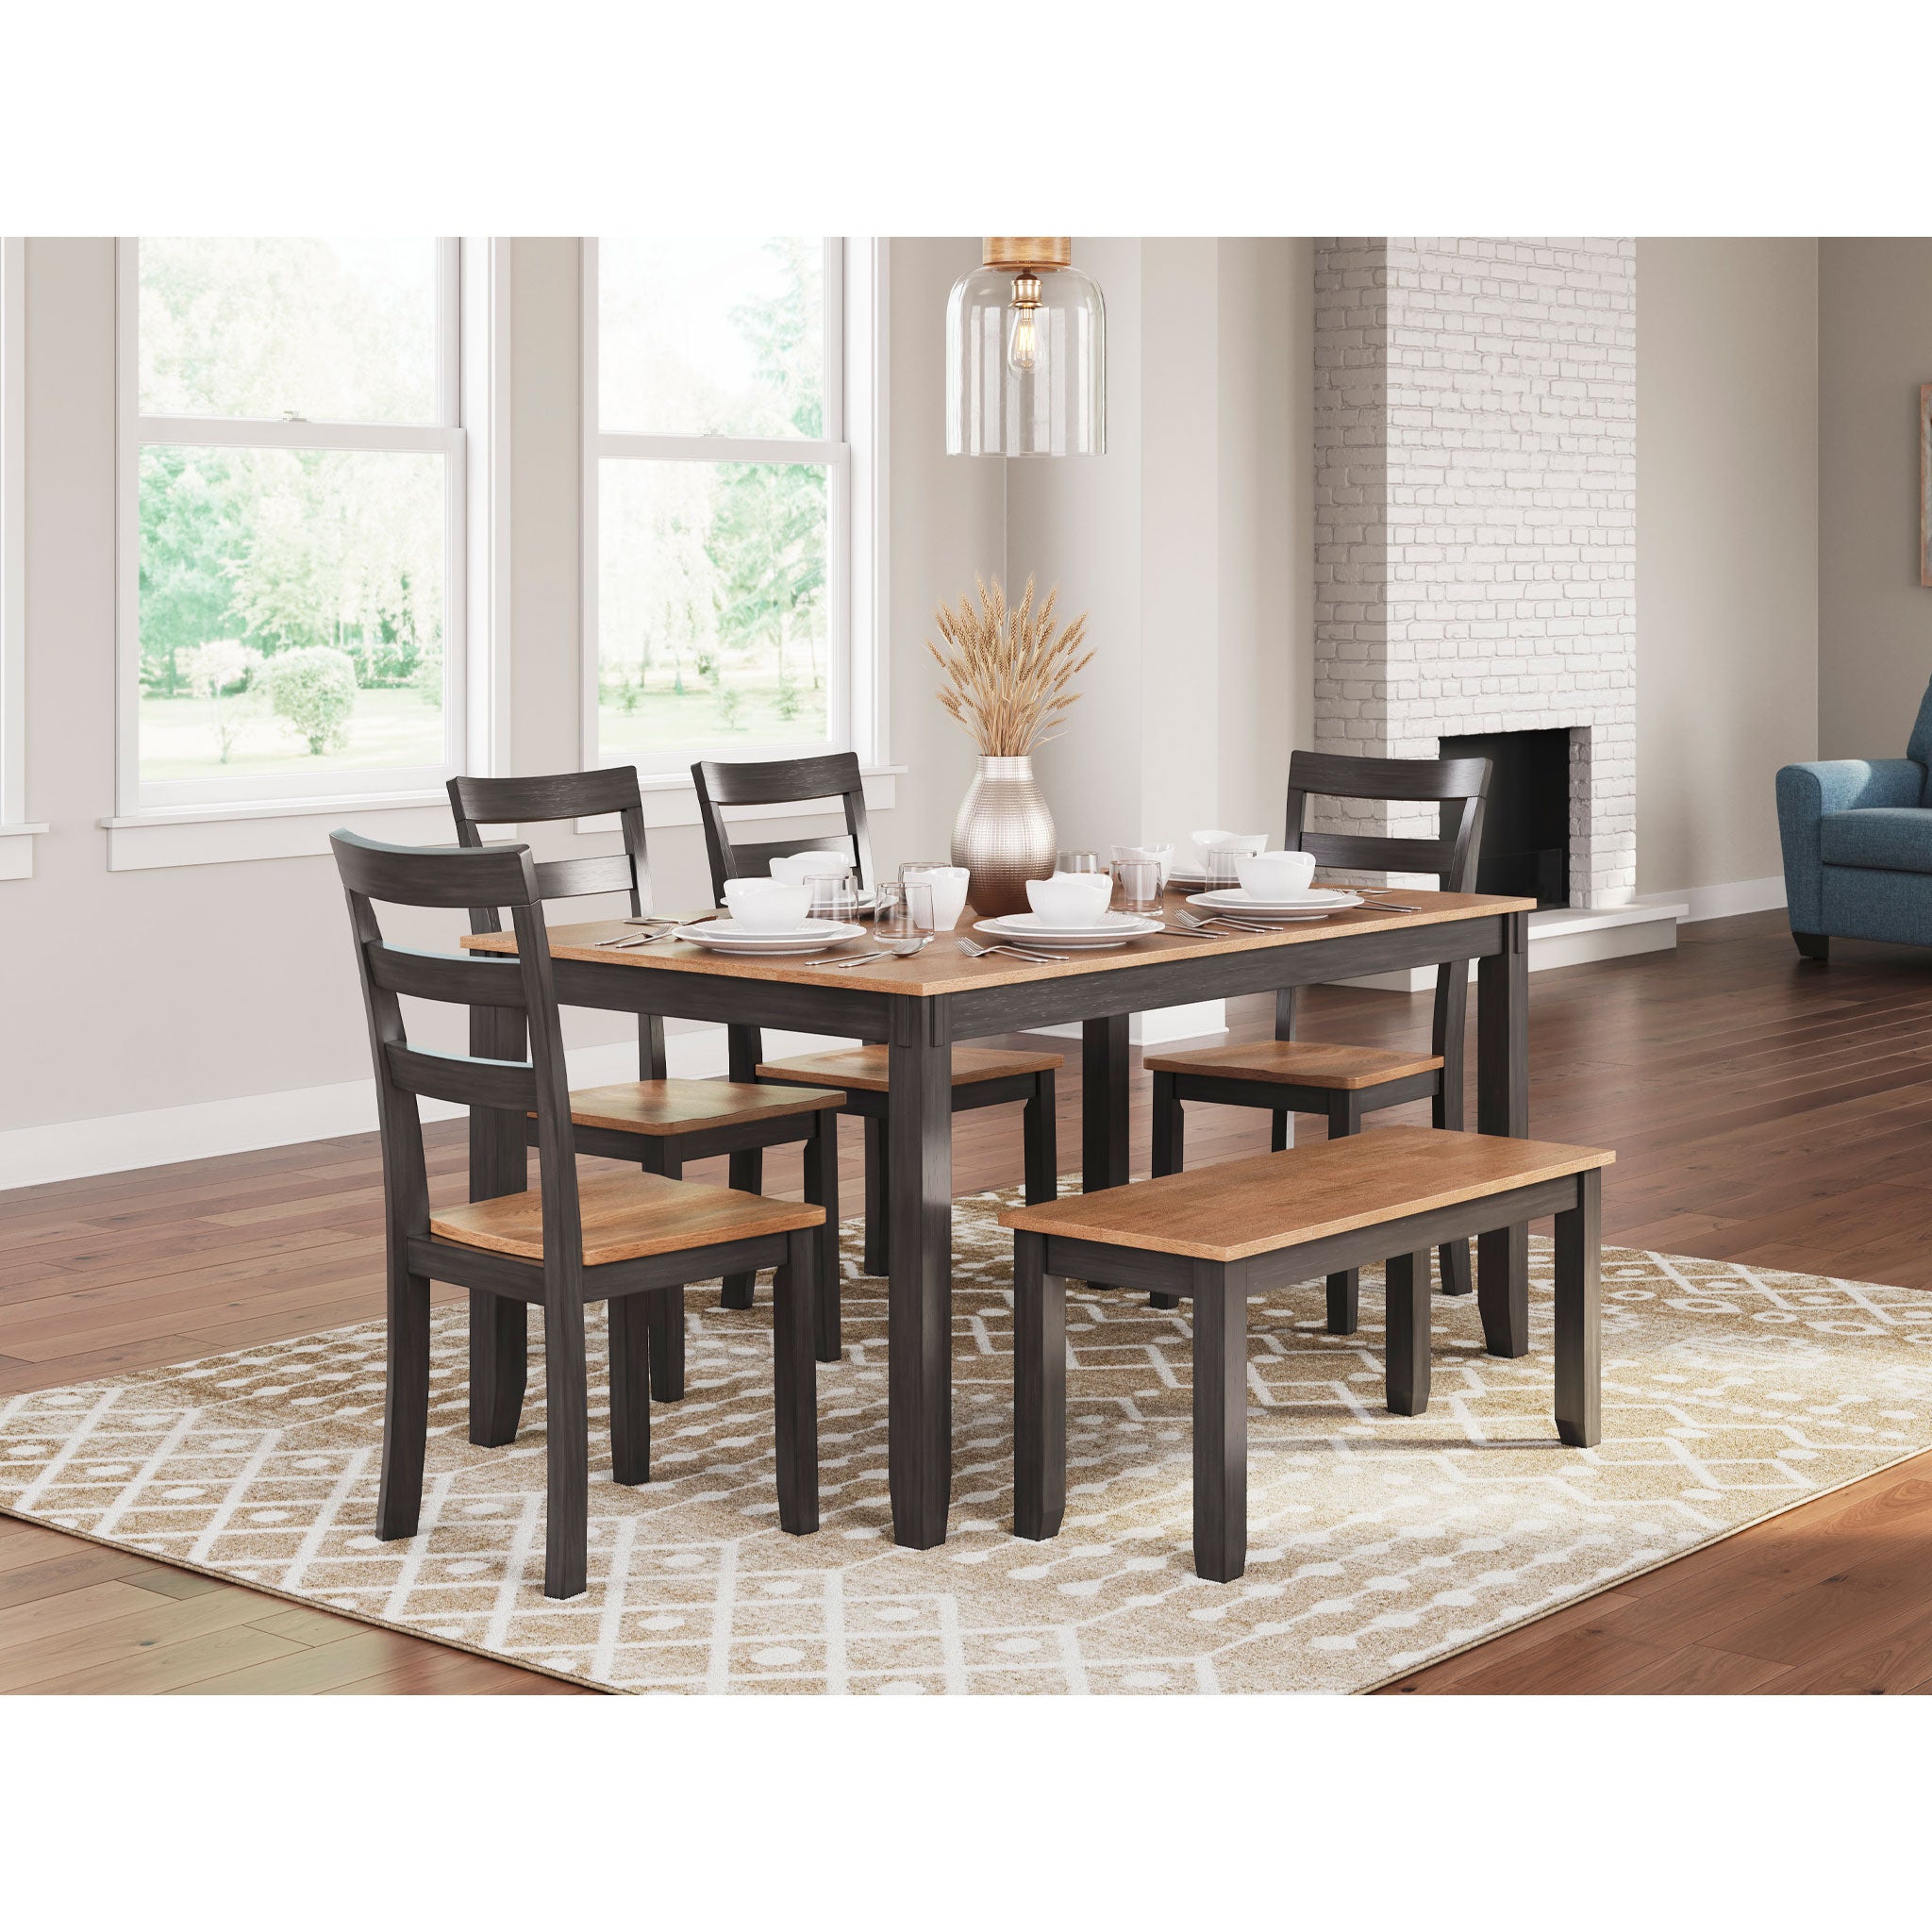 Gesthaven Dining Table with 4 Chairs and Bench